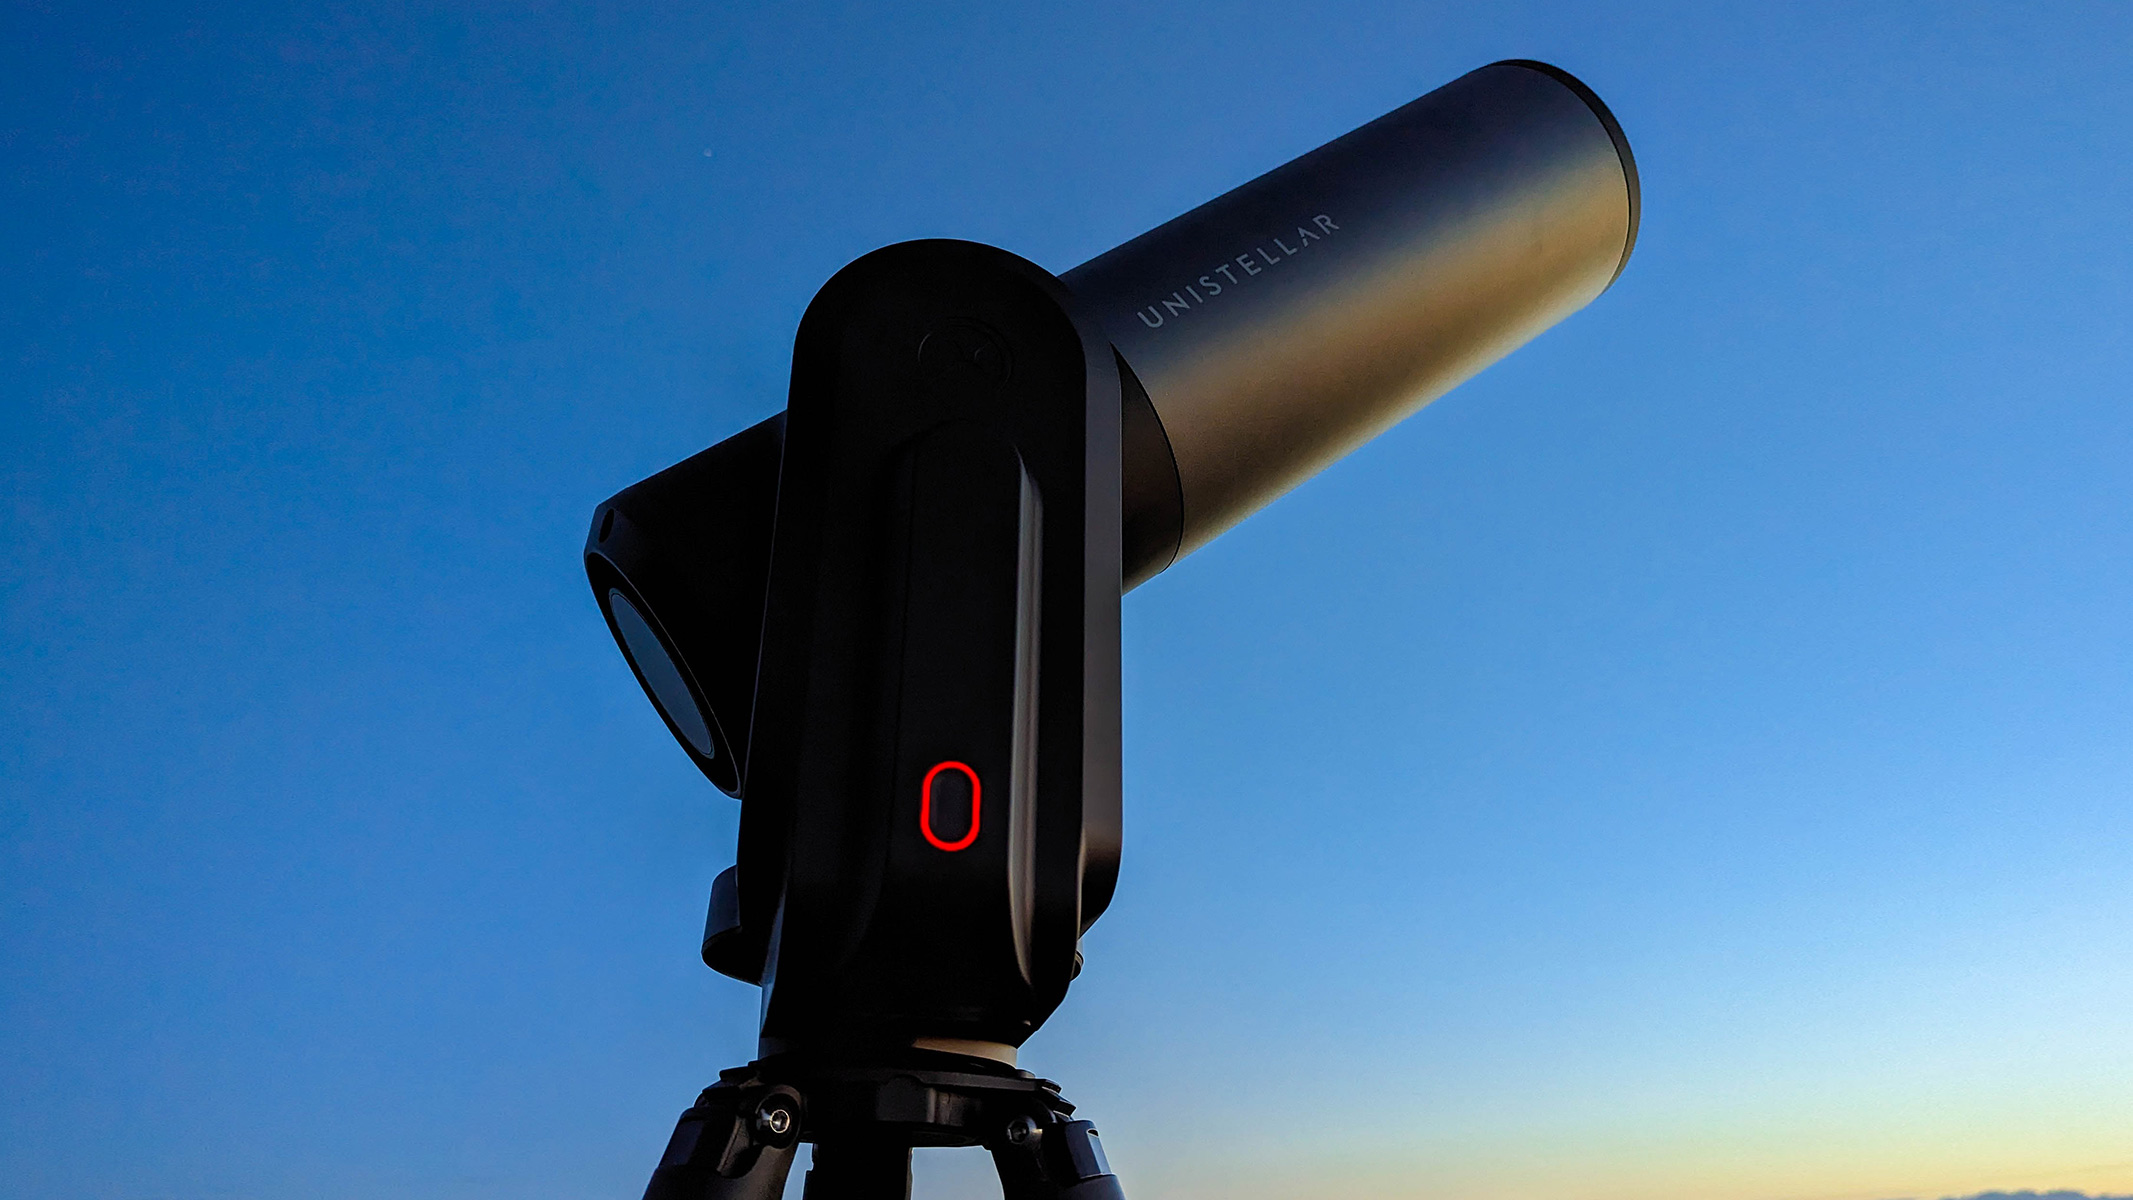 The Equinox 2 telescope in-use against a night sky